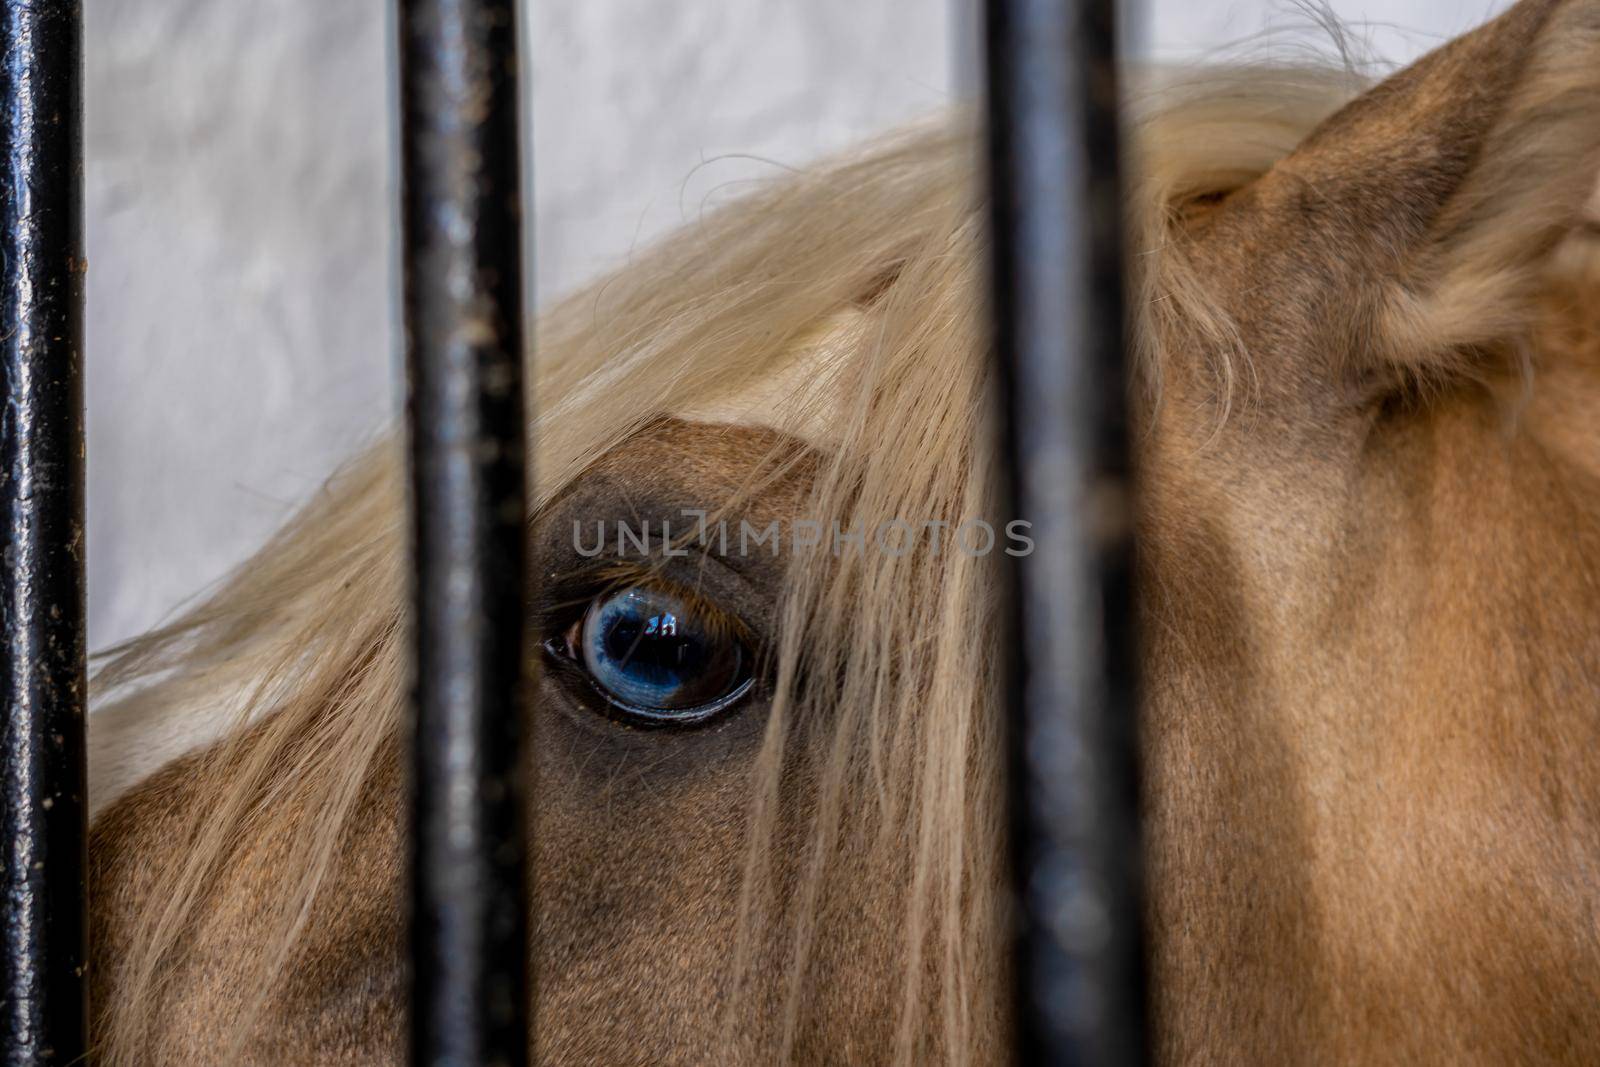 blue eye of horse close-up behind the bars of his stall looking at the camera